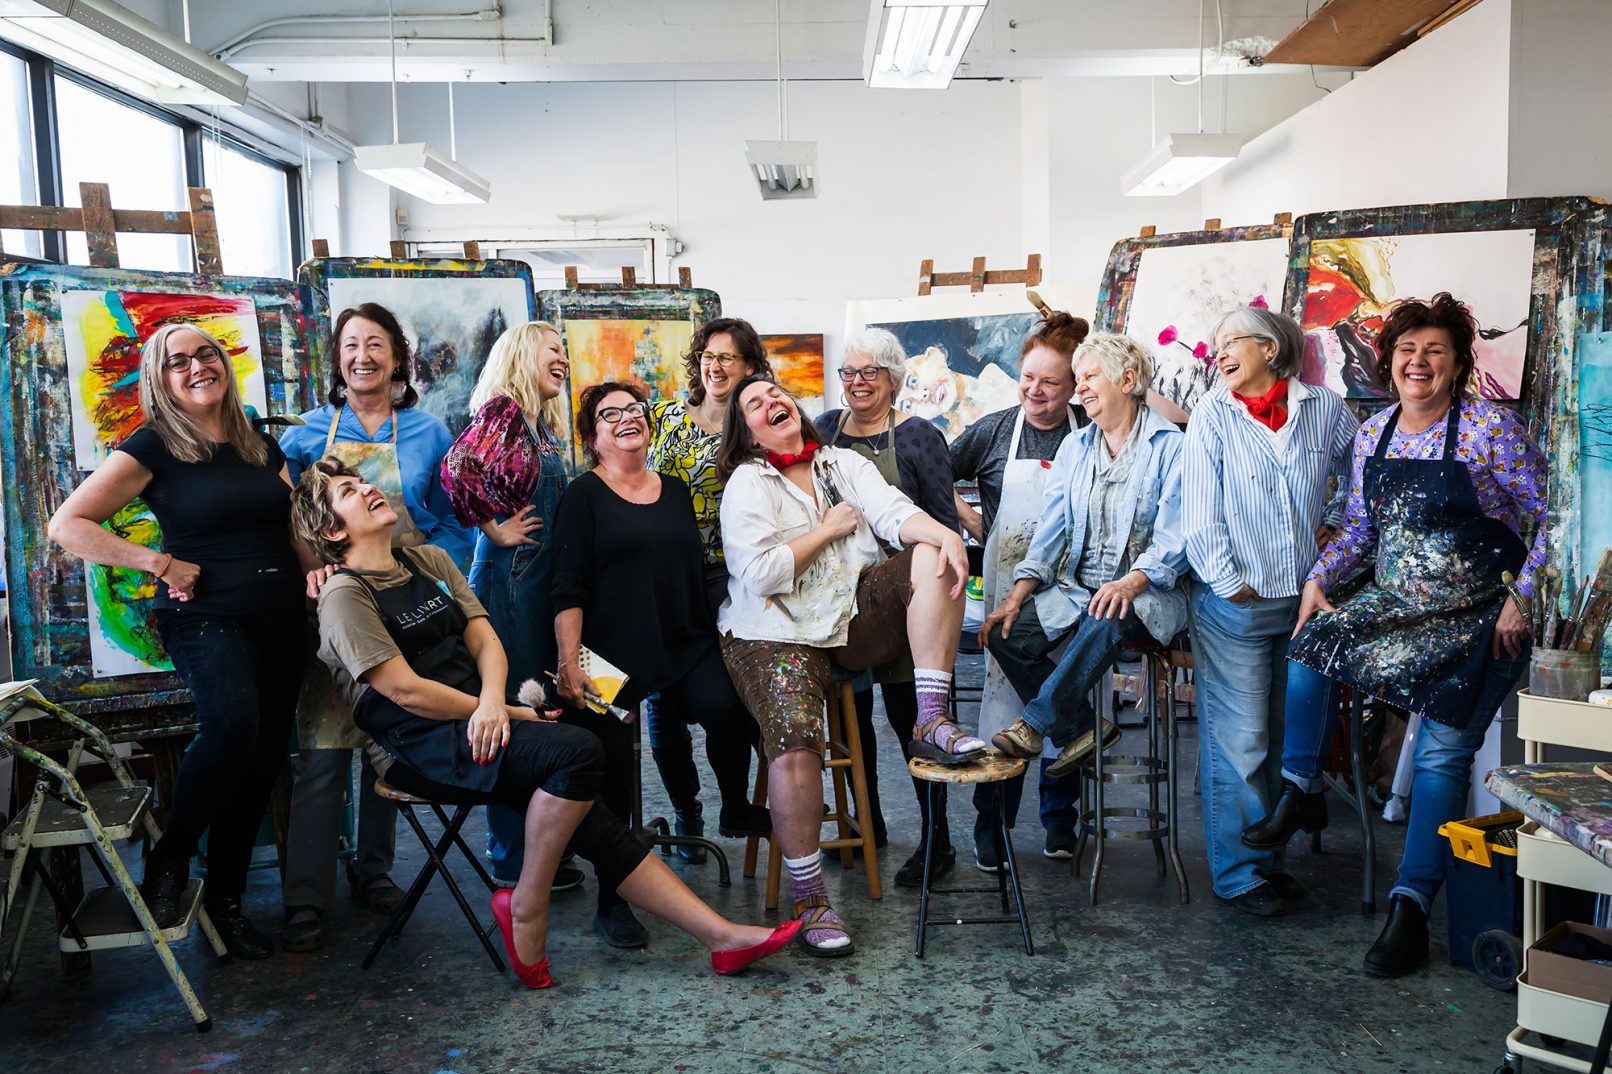 Editorial photo of artists and painters by Marili Clark Photographer.